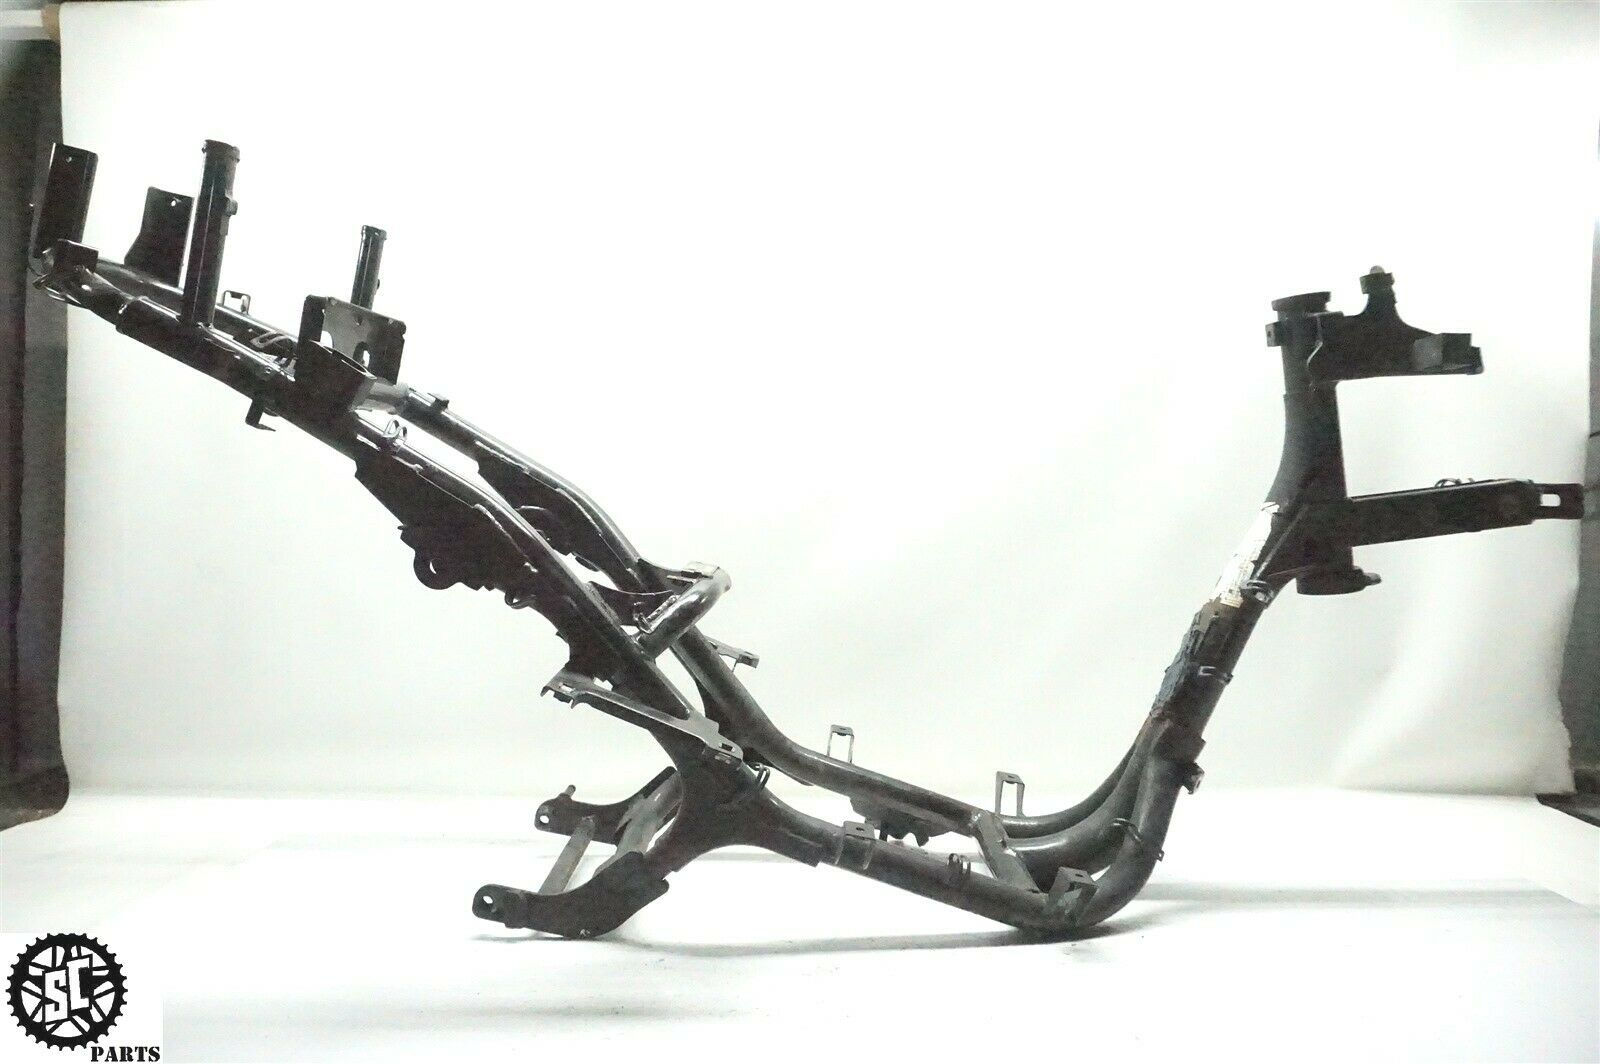 2007 Genuine Buddy Scooter Frame Chassis Ca Slvg Ttl